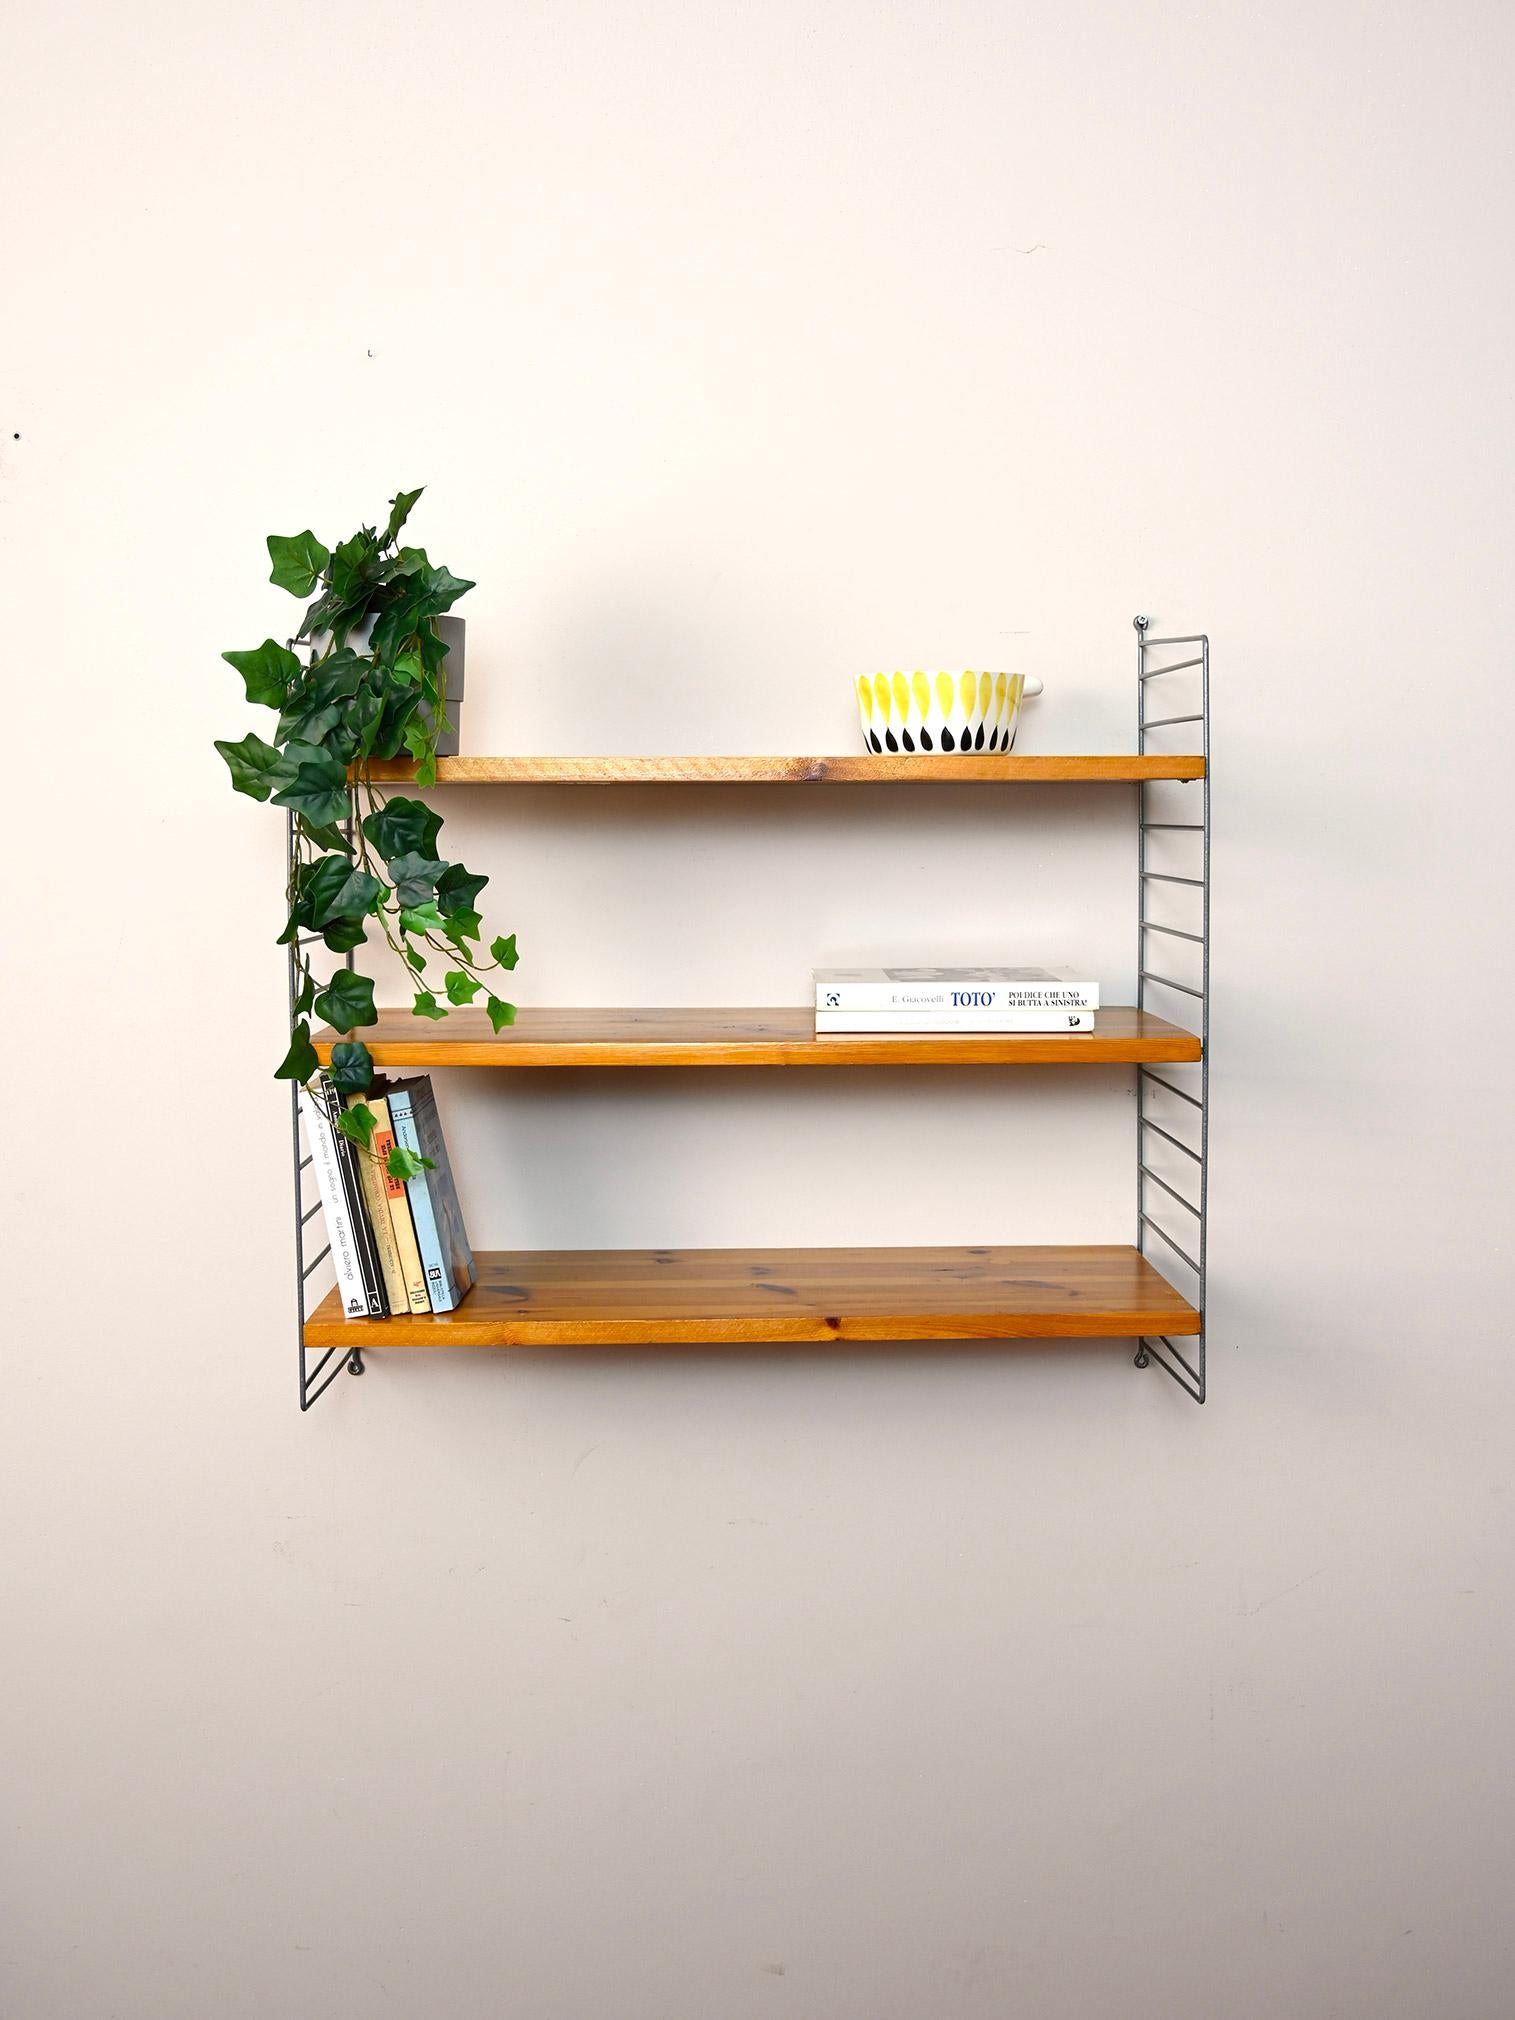 Scandinavian 1960s wall-mounted bookcase.

This simple shelving system consists of a metal side frame on which three pine shelves rest.
Simple and functional it can be hung in different rooms of the house.

Good condition. It has been restored with